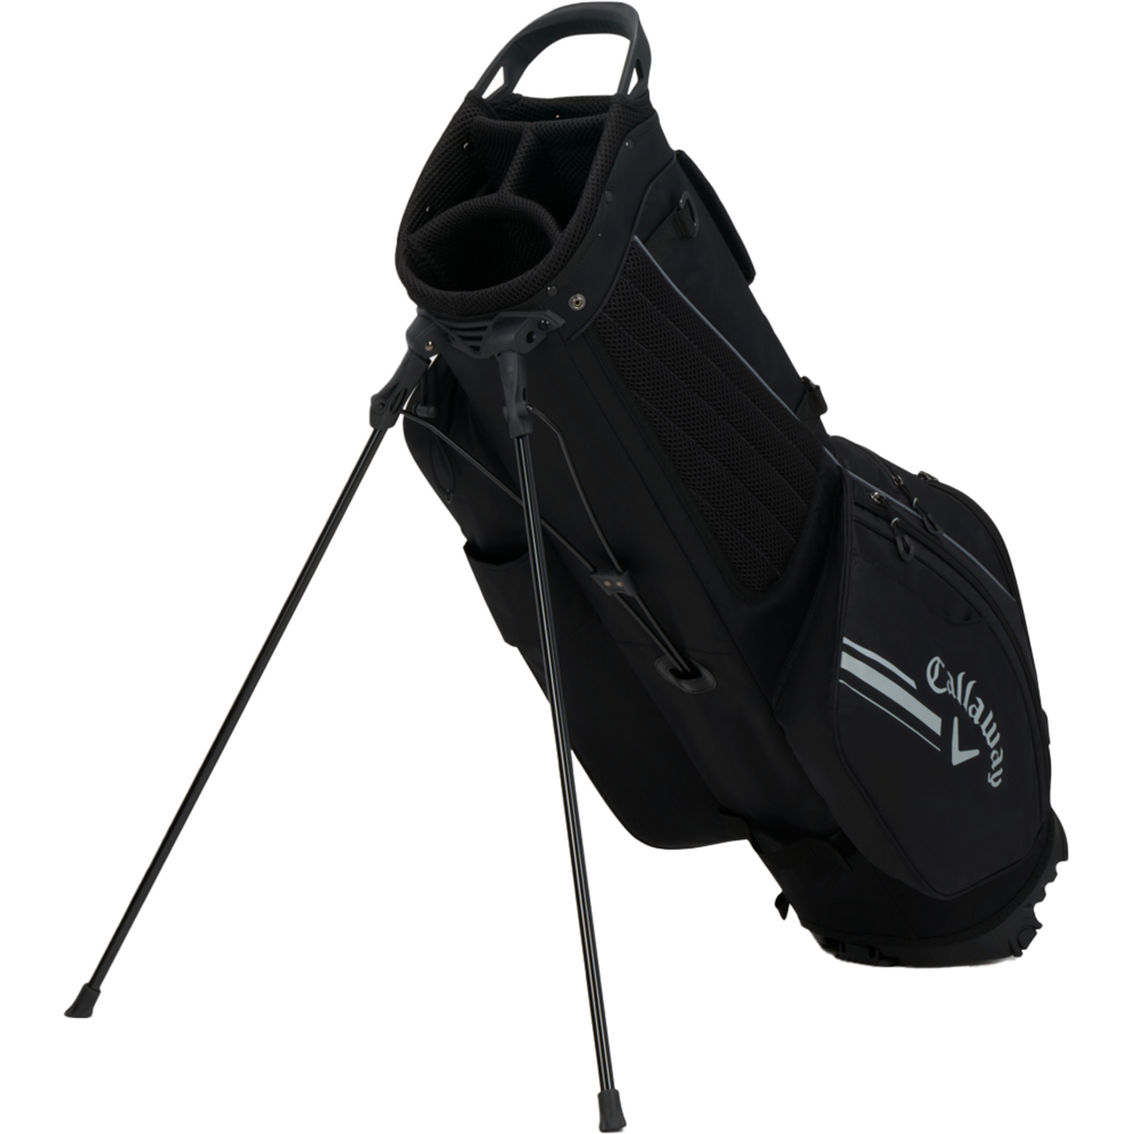 Callaway 2023 Chev Stand Bag - Image 2 of 4